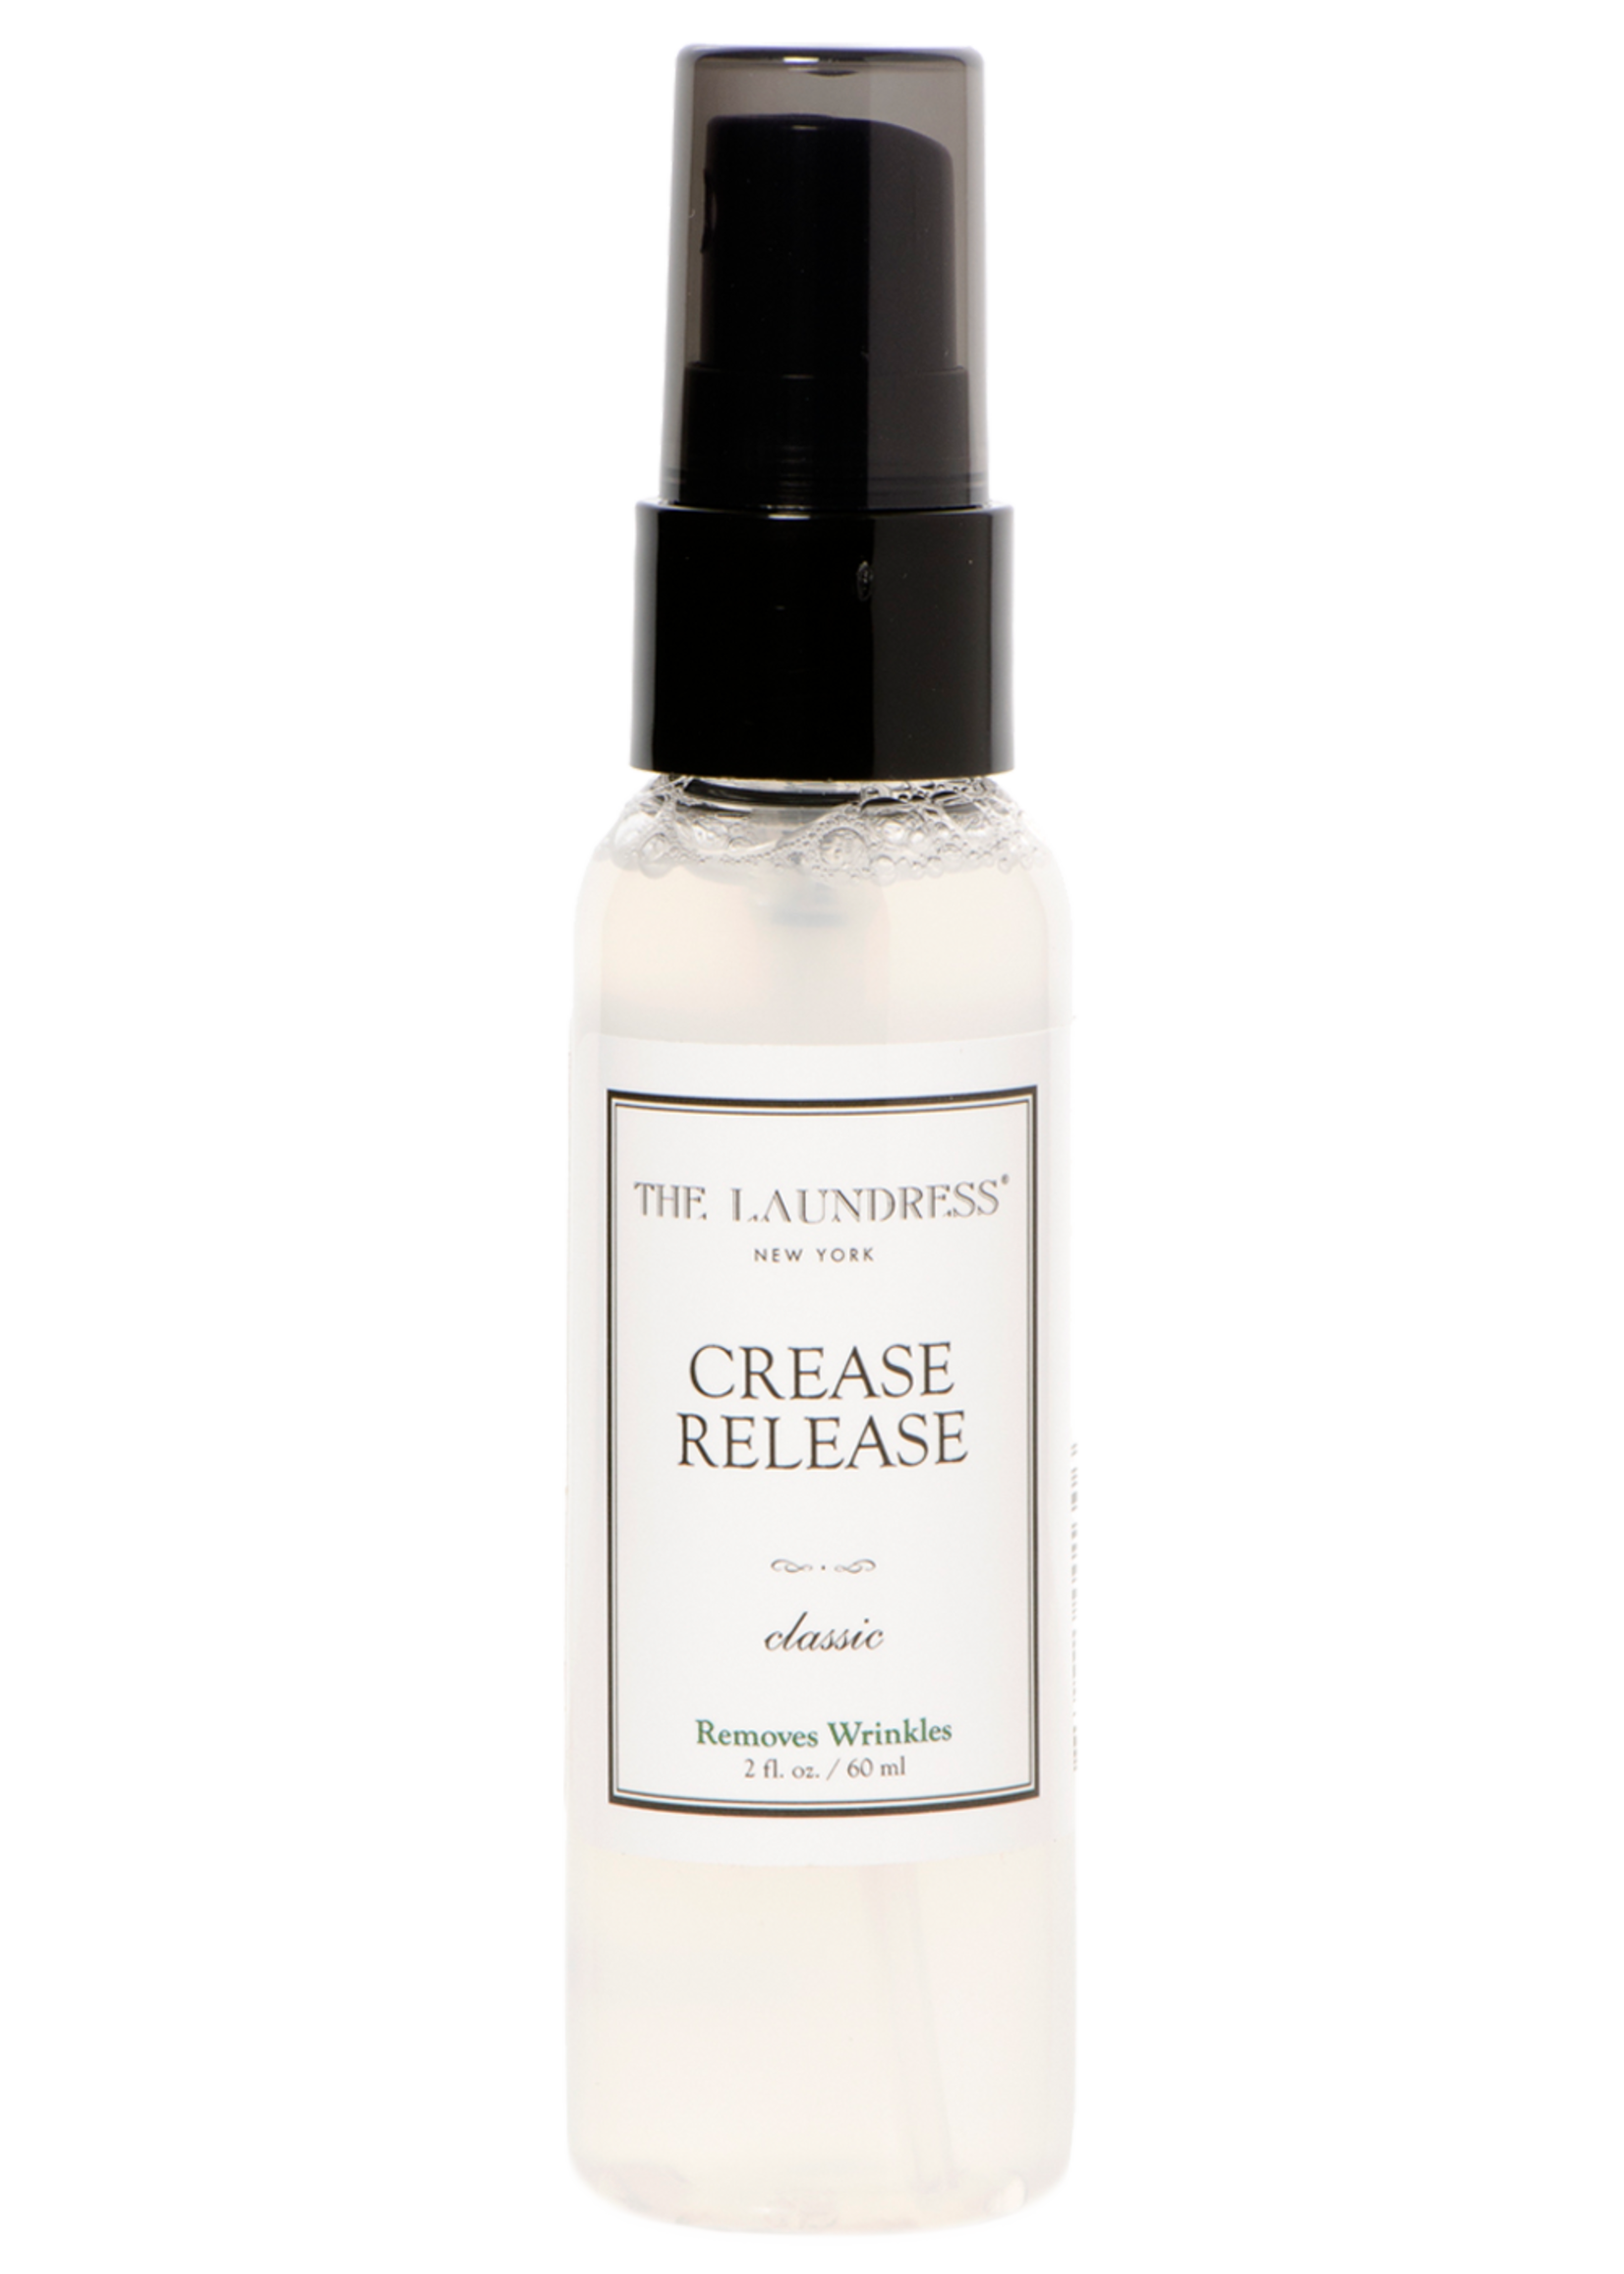 The Laundress New York Crease Release